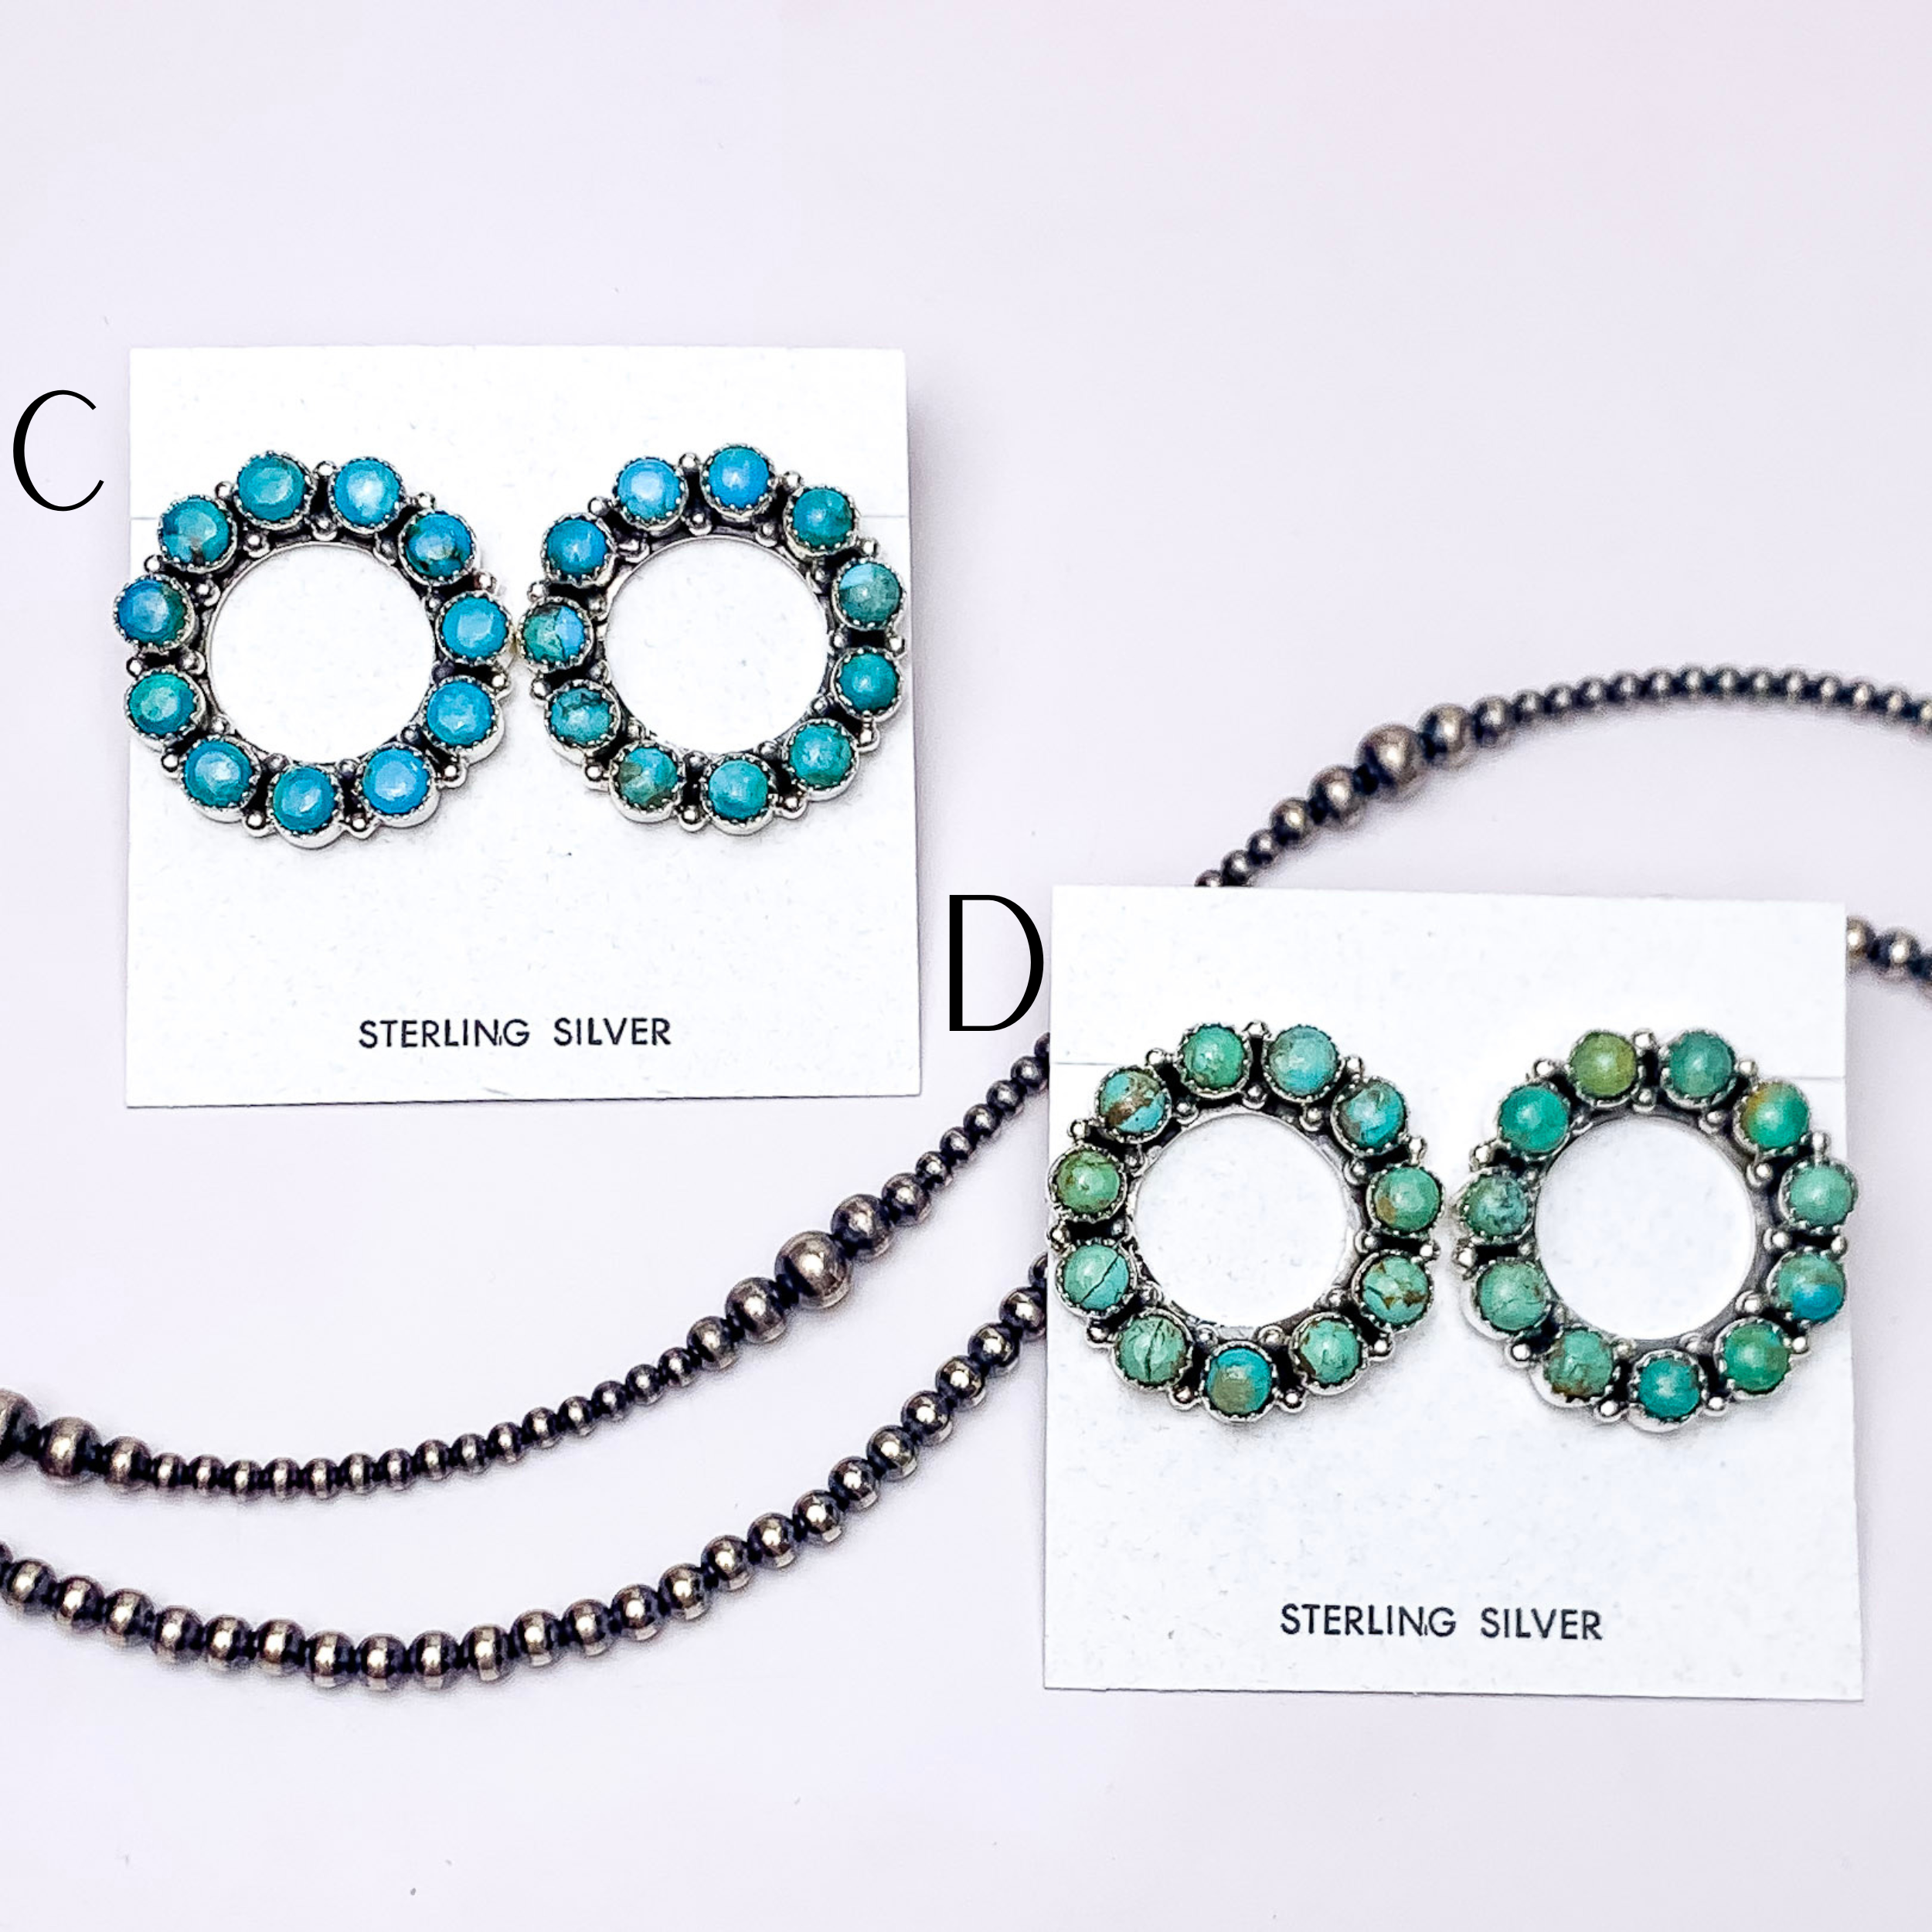 Hada Collection | Handmade Sterling Silver Circle Stud Earrings with Kingman Turquoise Stones - Giddy Up Glamour Boutique